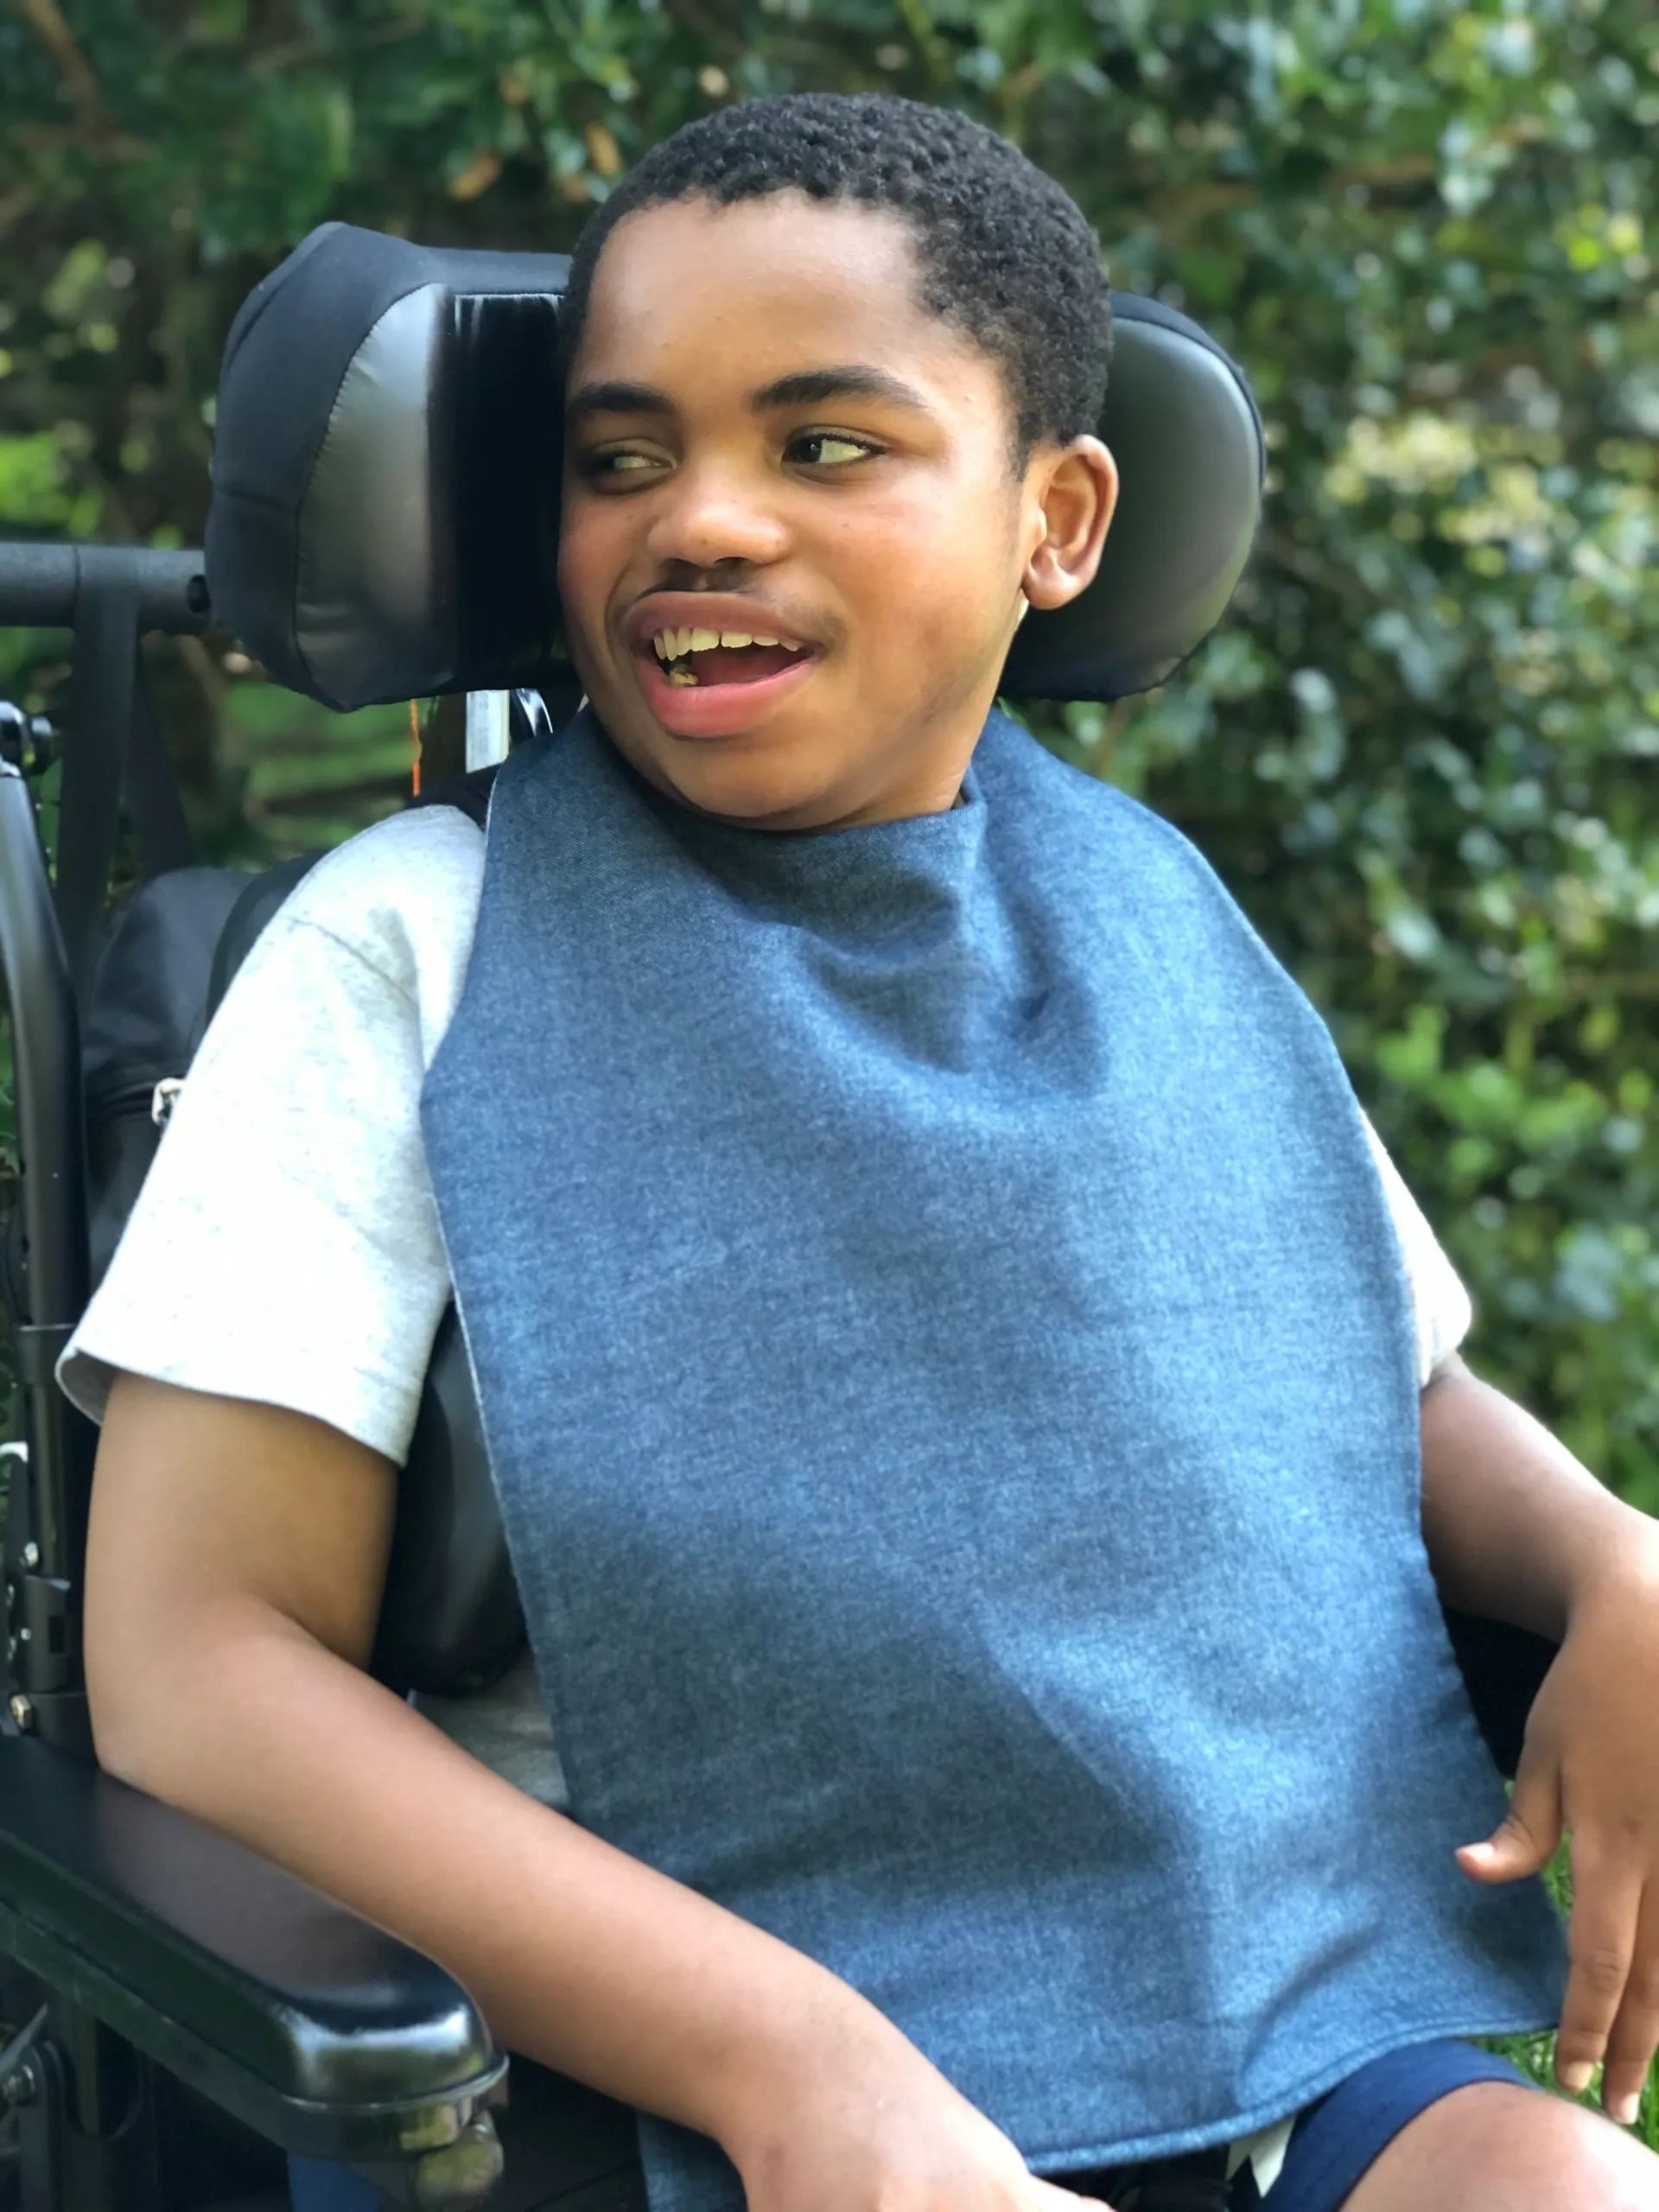 Our Special-Needs Journey